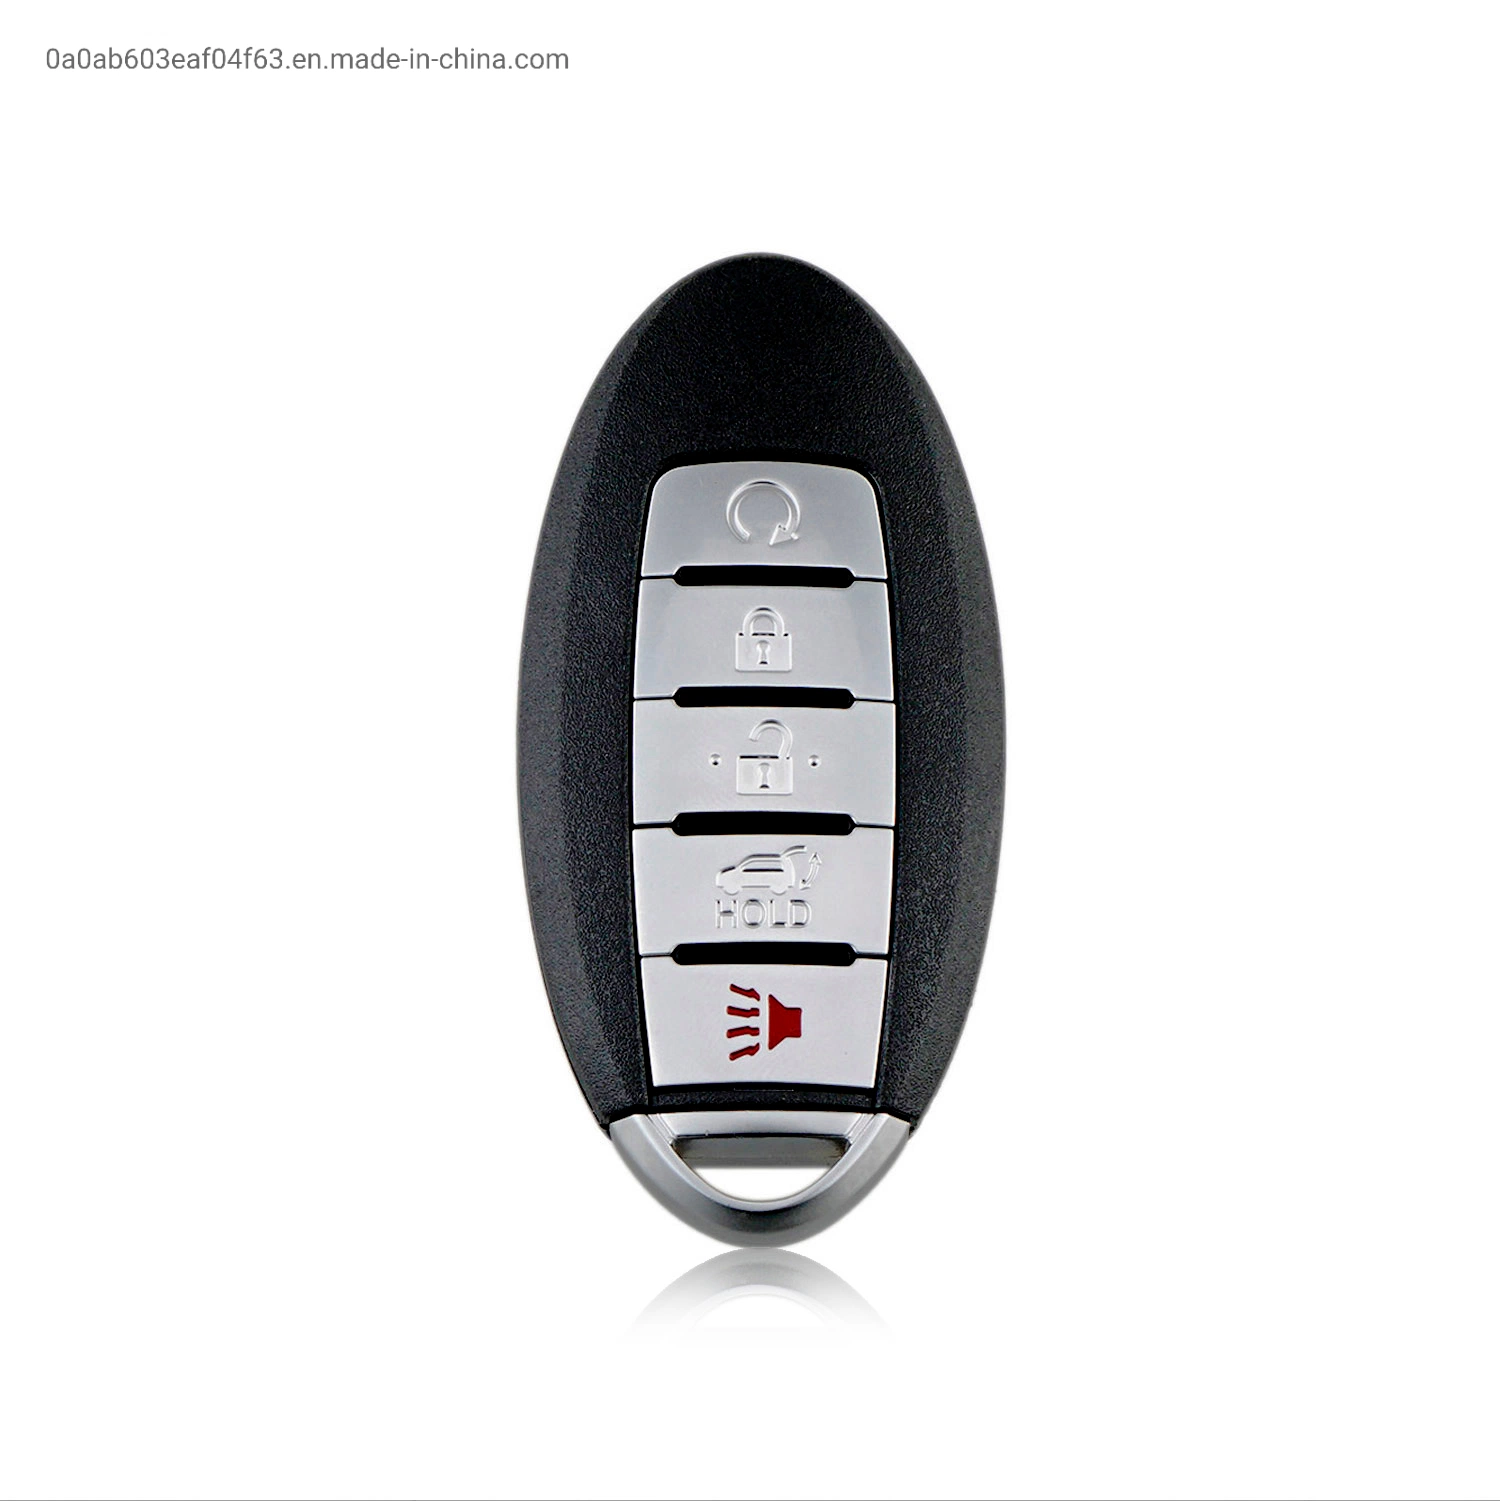 5 Buttons 433MHZ 4A Chip Smart Keyless Entry Car Fob Remote Key For 2017-2018 Nissan Rogue  Auto Parts S180144110 FCC ID : KR5S180144106